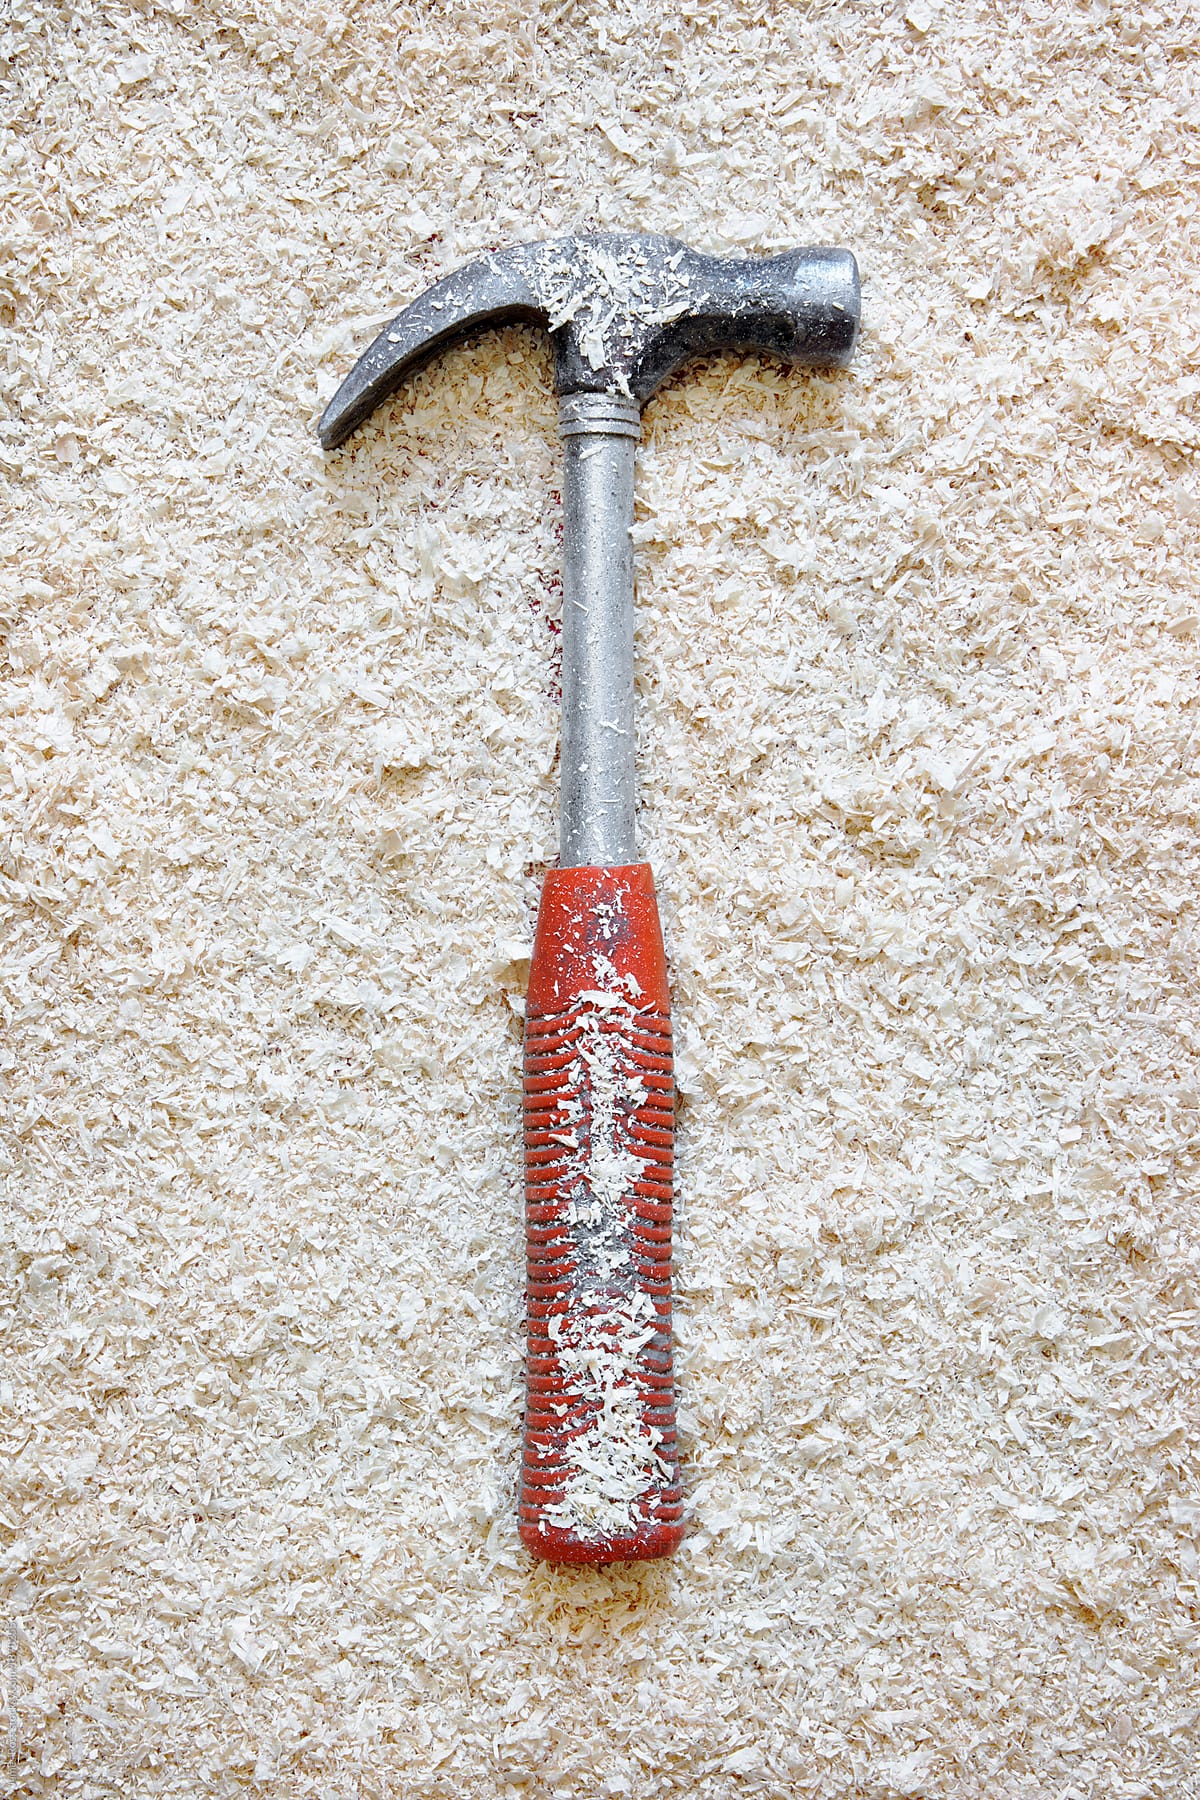 Hammer and Sawdust